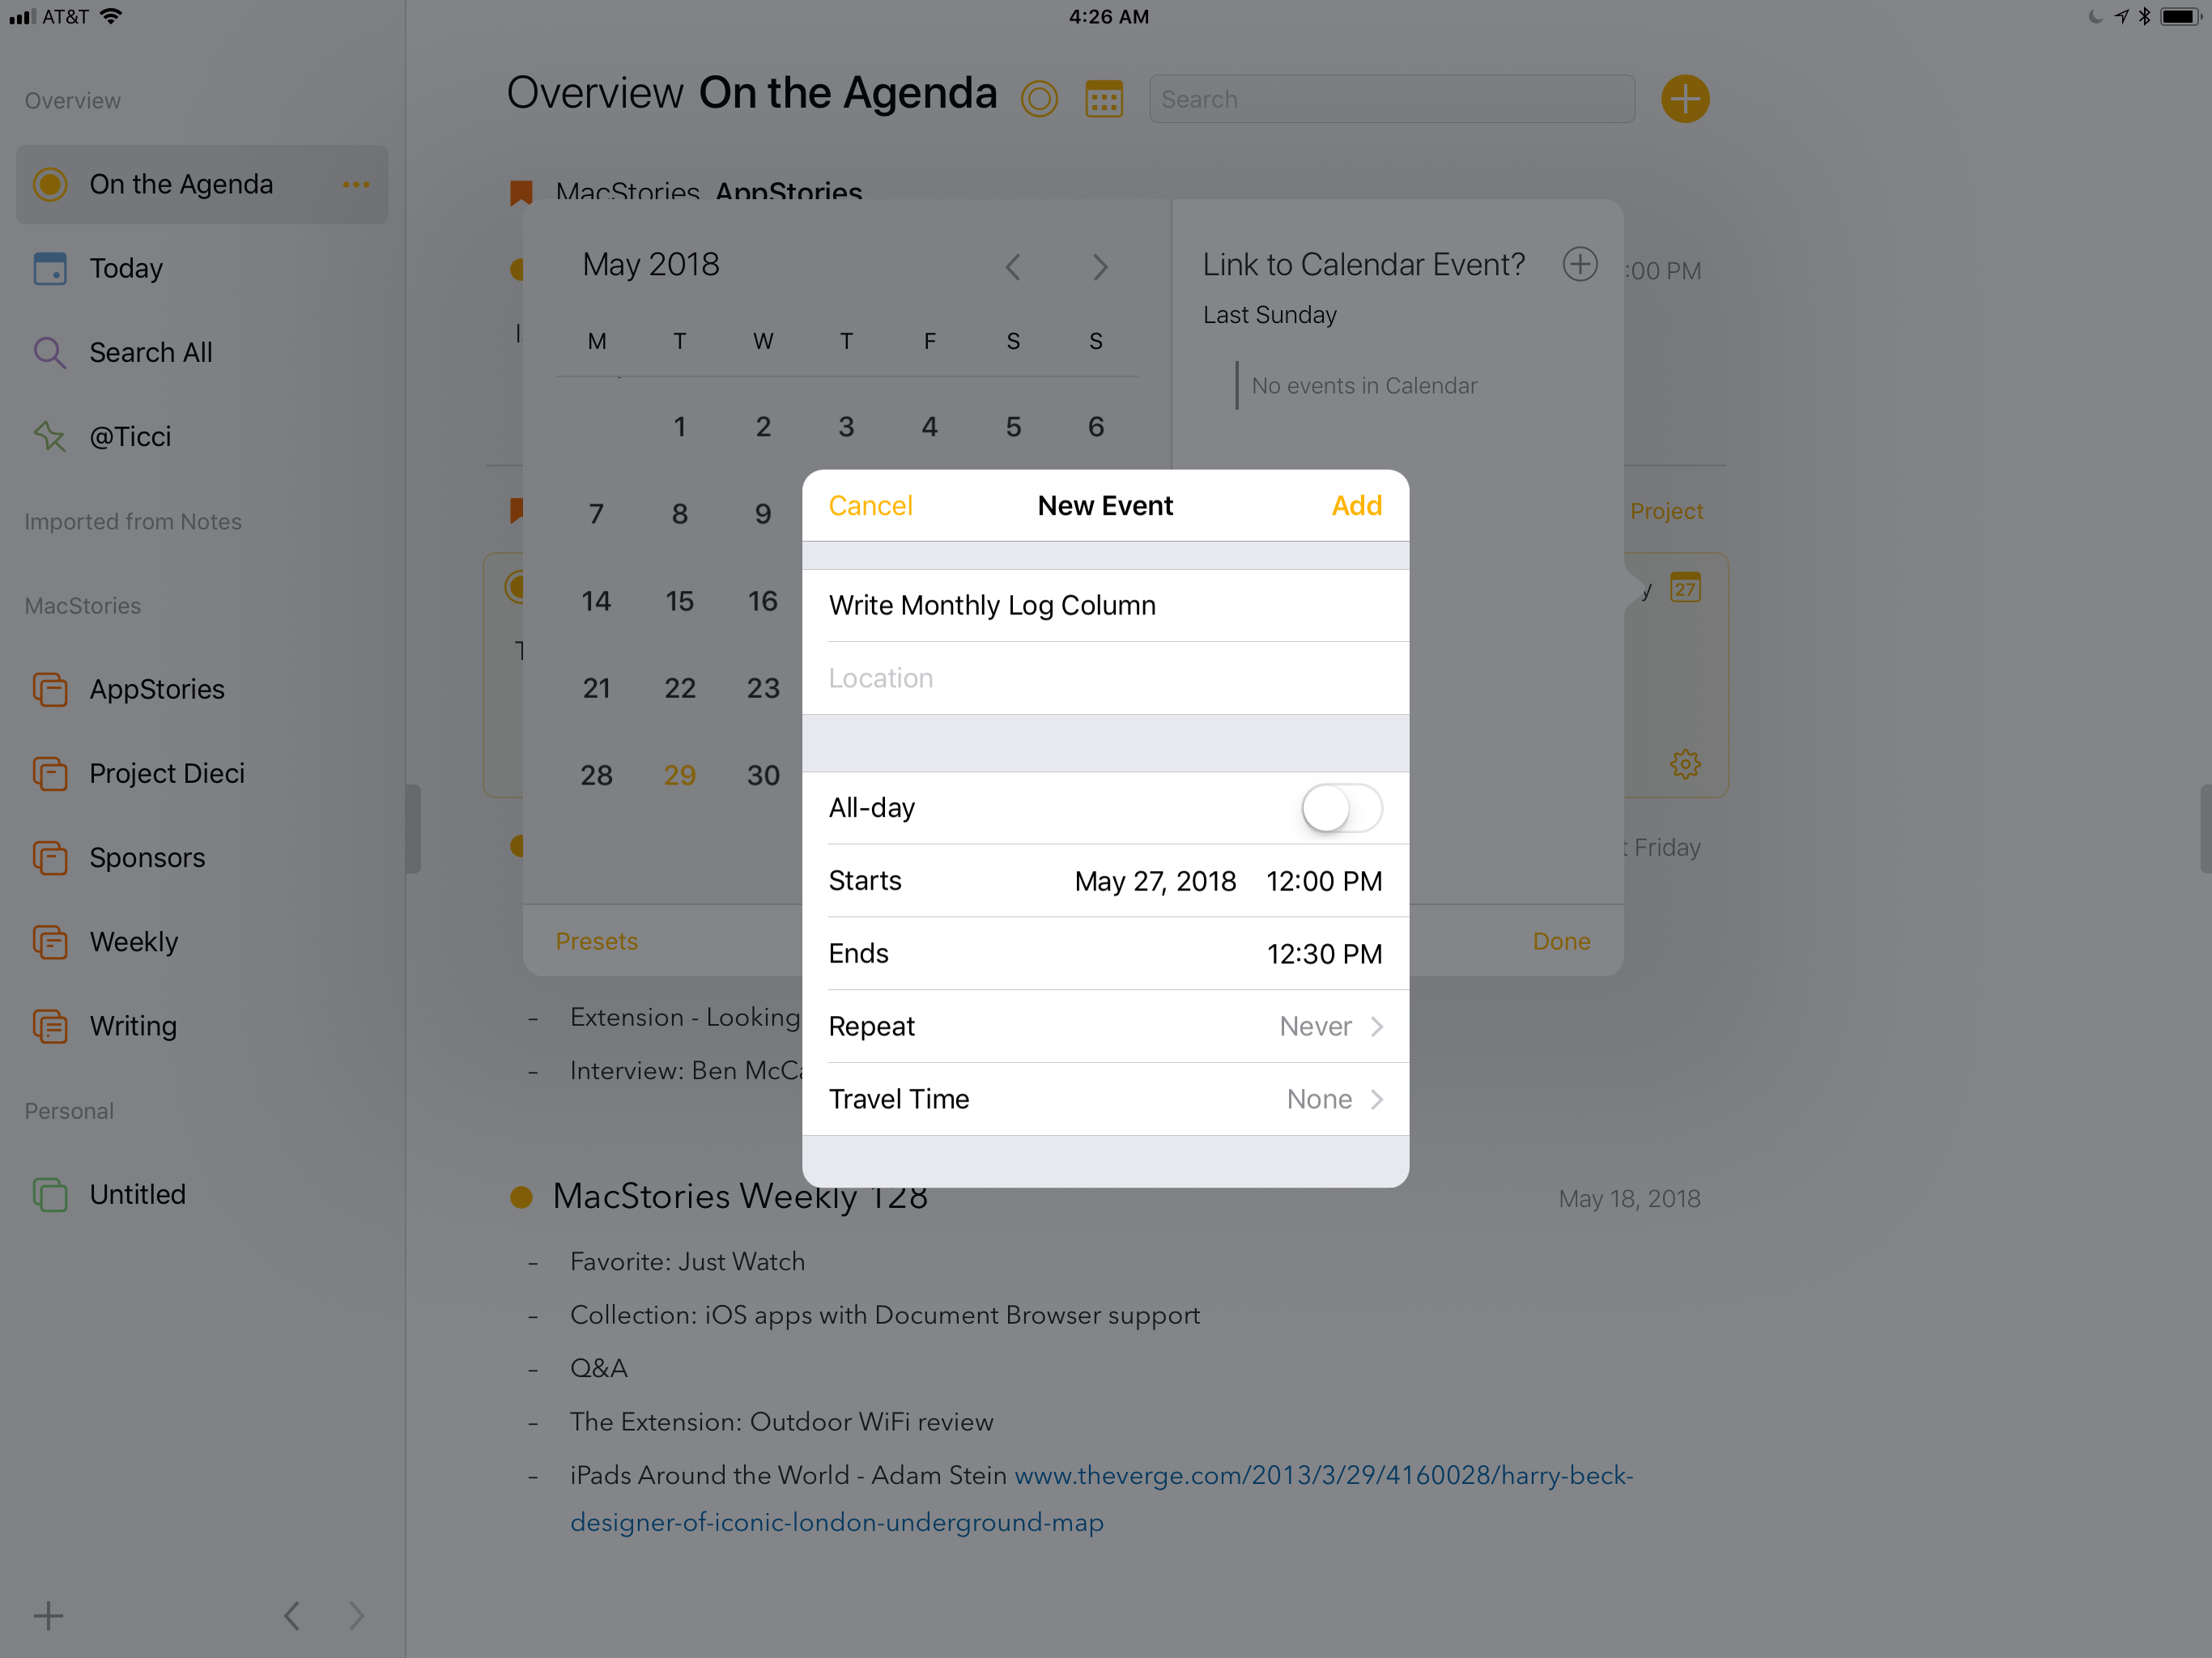 Notes can be associated with events in your calendar.